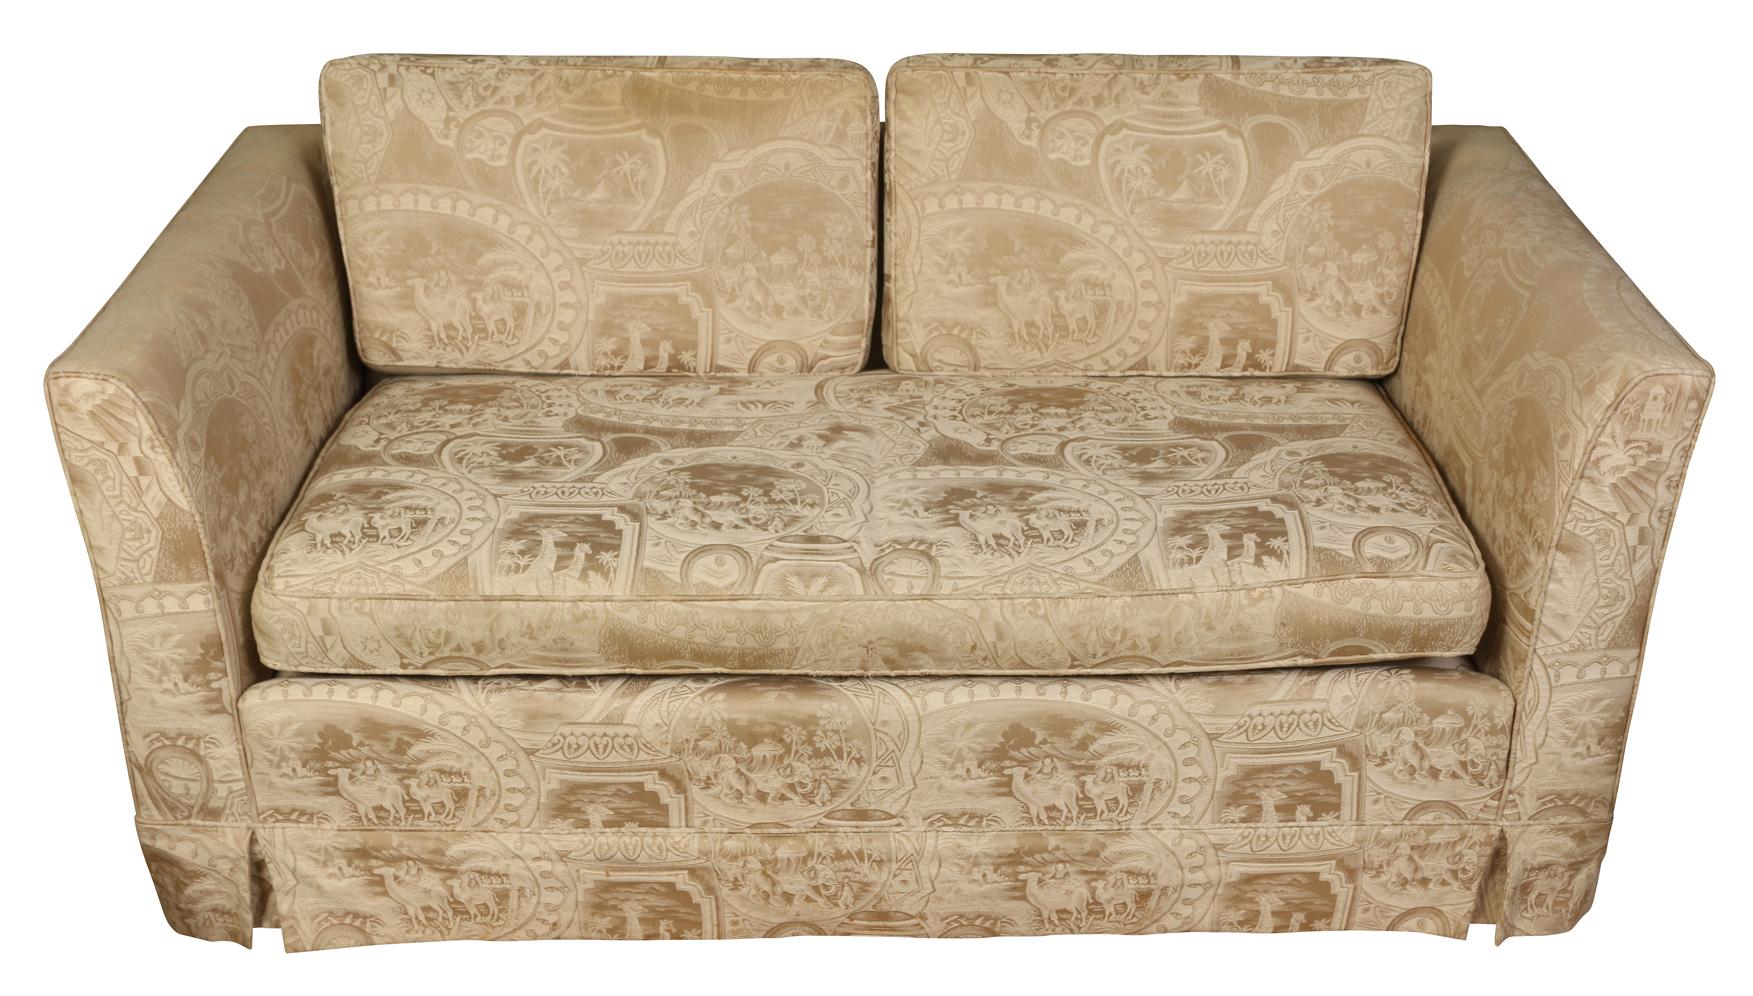 We love this piece for its simplicity. This tailored loveseat had a loose back with two cushions, slender high arms and one seat cushion. Upholstered in a neutral damask, this understated piece could go anywhere--at the foot of a bed, in a living